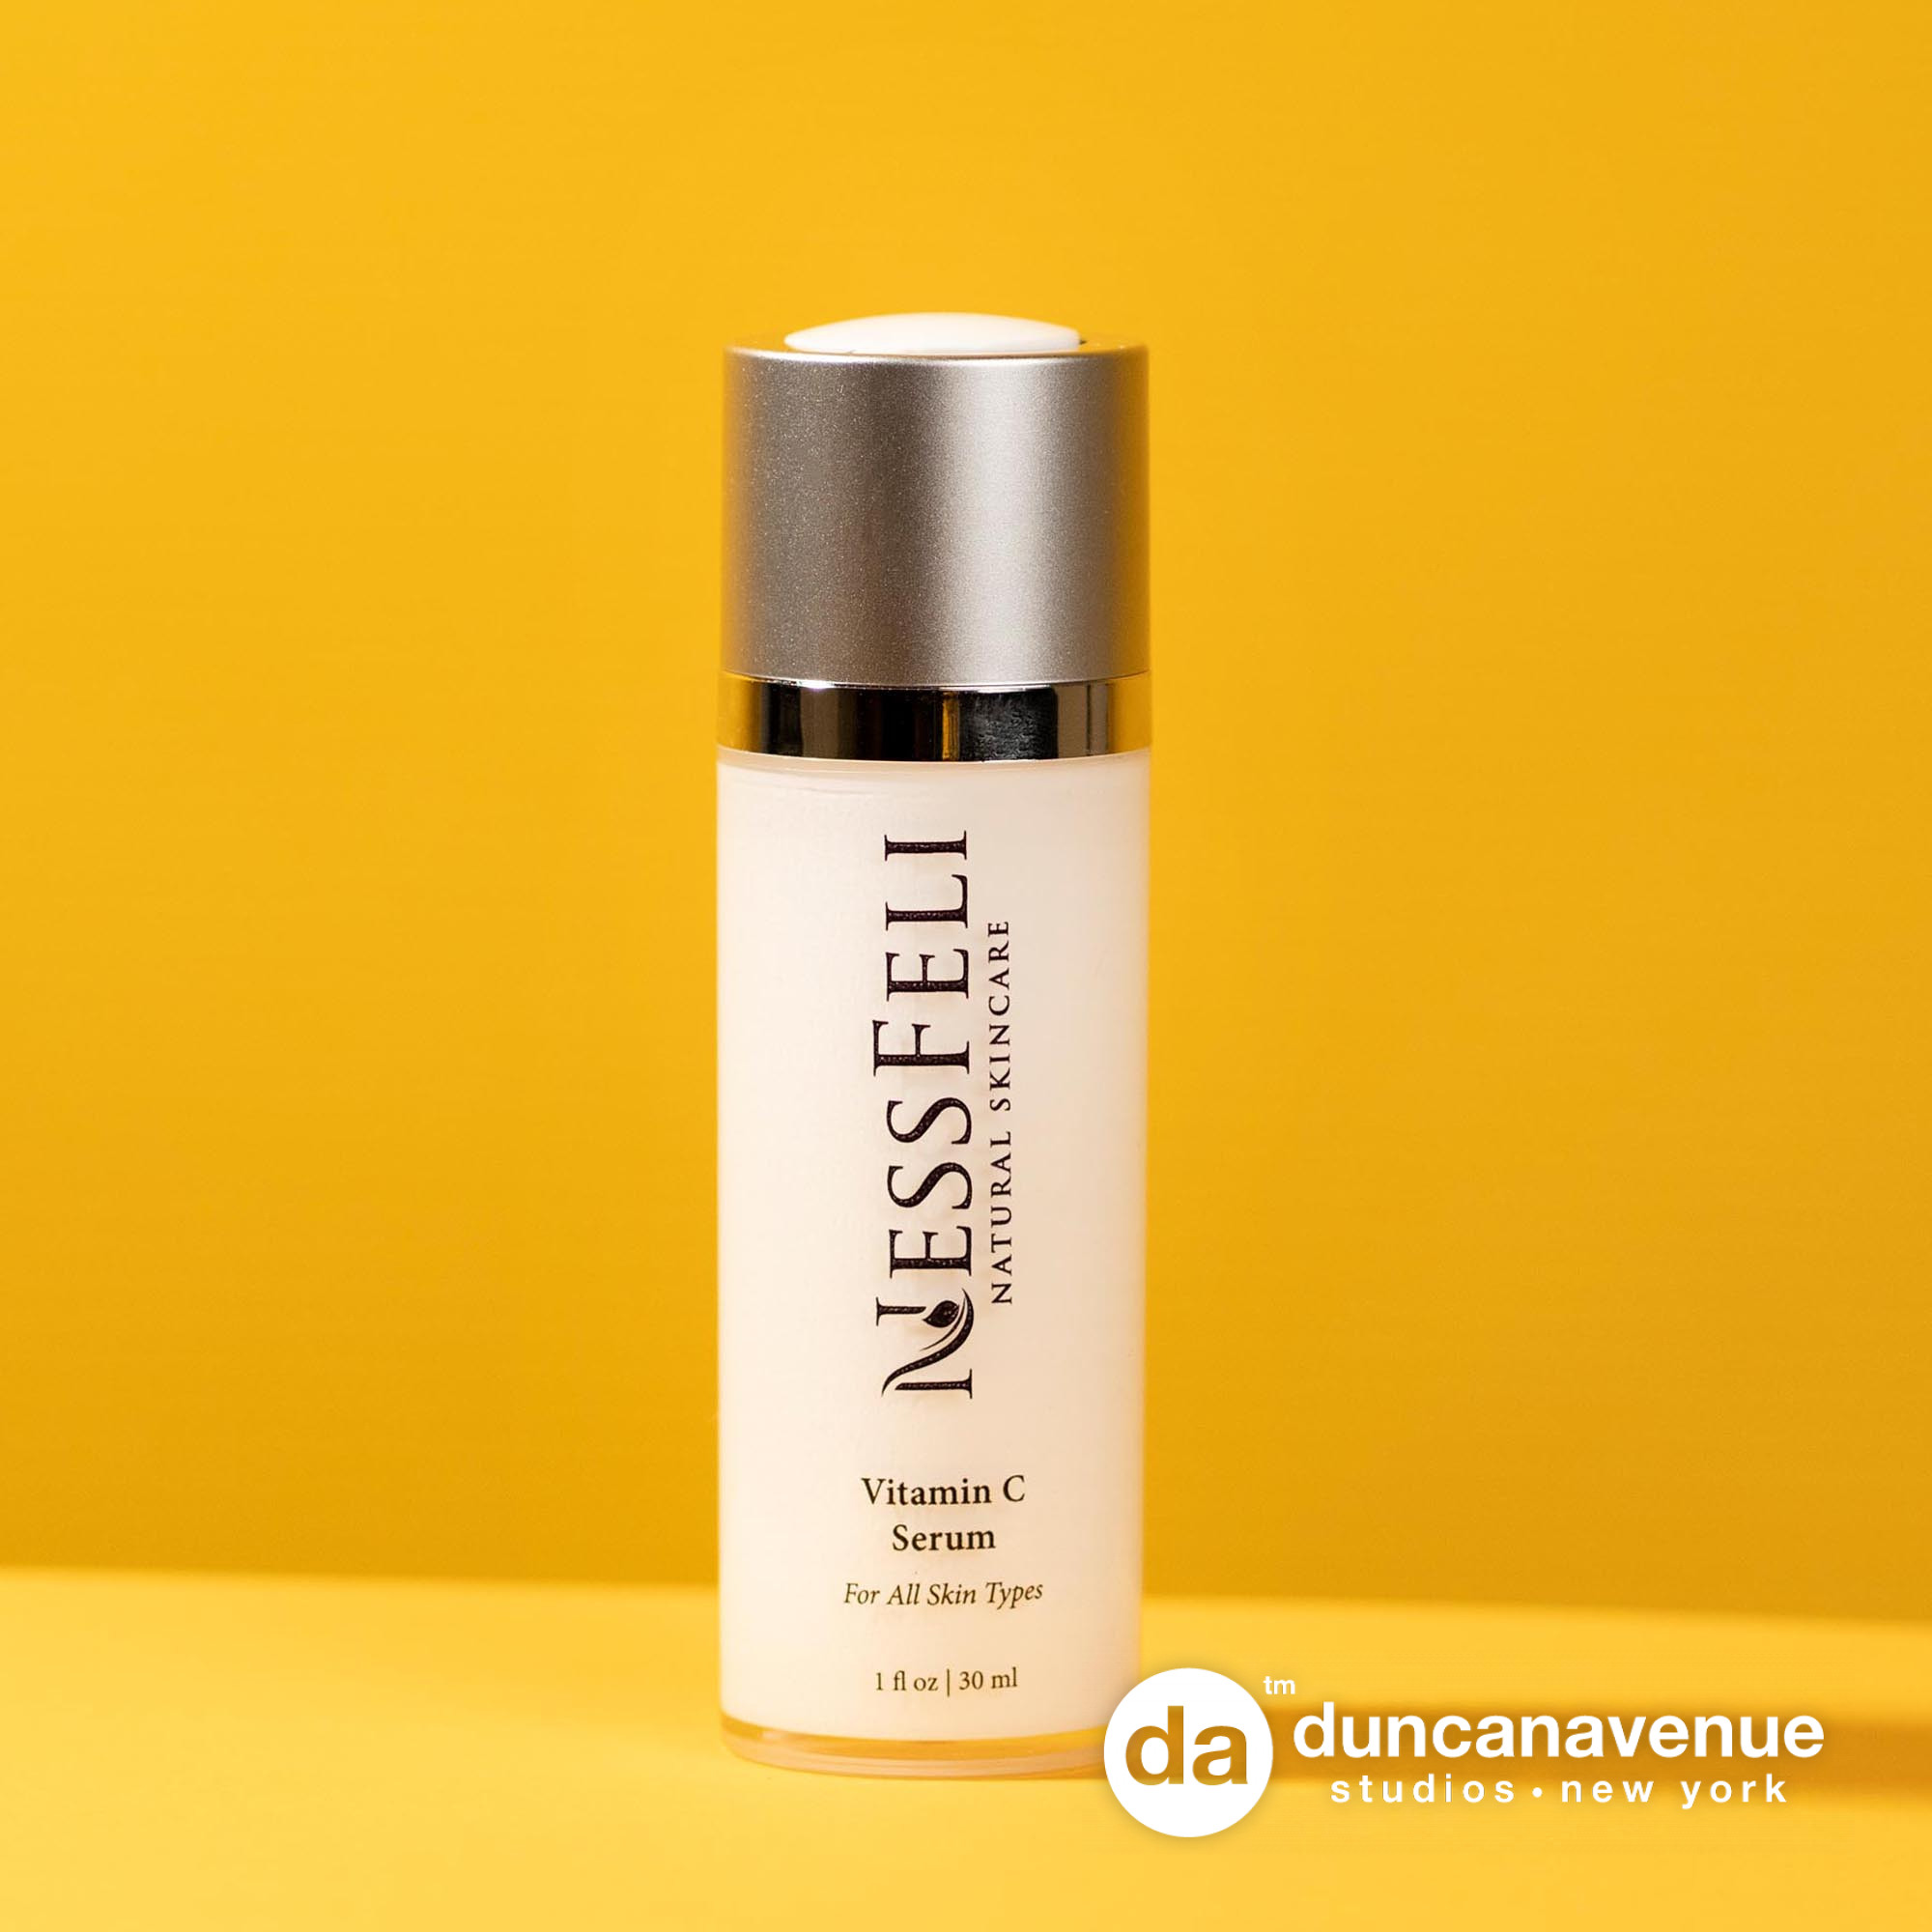 Spring Skincare Tips for Beautiful Healthy Glowing Skin – Presented by Nessfeli Natural Skincare – Product Photography by Duncan Avenue Studios